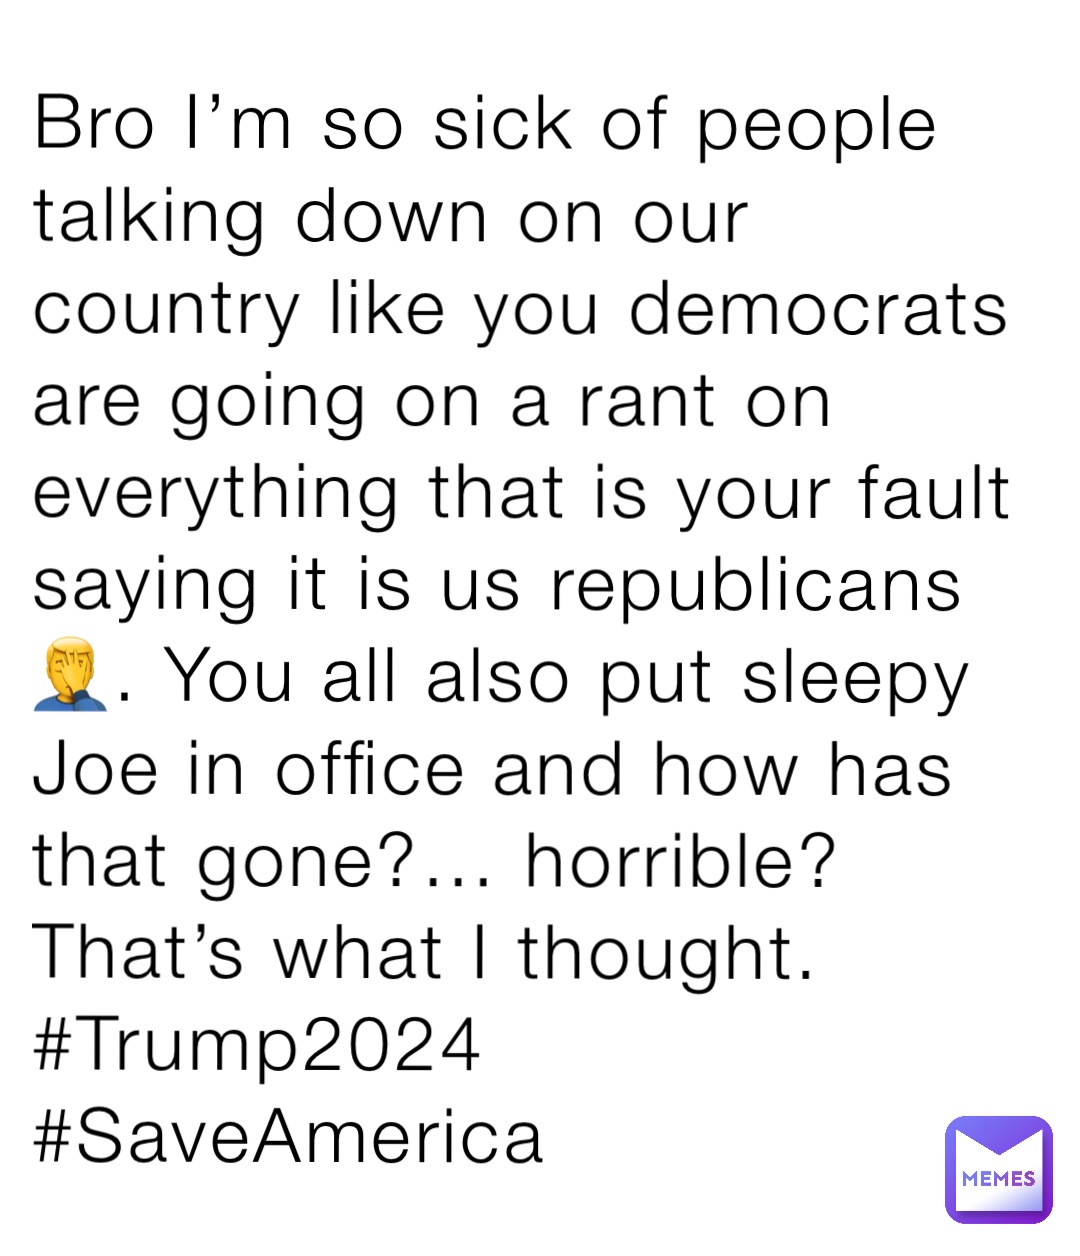 Bro I’m so sick of people talking down on our country like you democrats are going on a rant on everything that is your fault saying it is us republicans 🤦‍♂️. You all also put sleepy Joe in office and how has that gone?… horrible? That’s what I thought. #Trump2024 #SaveAmerica